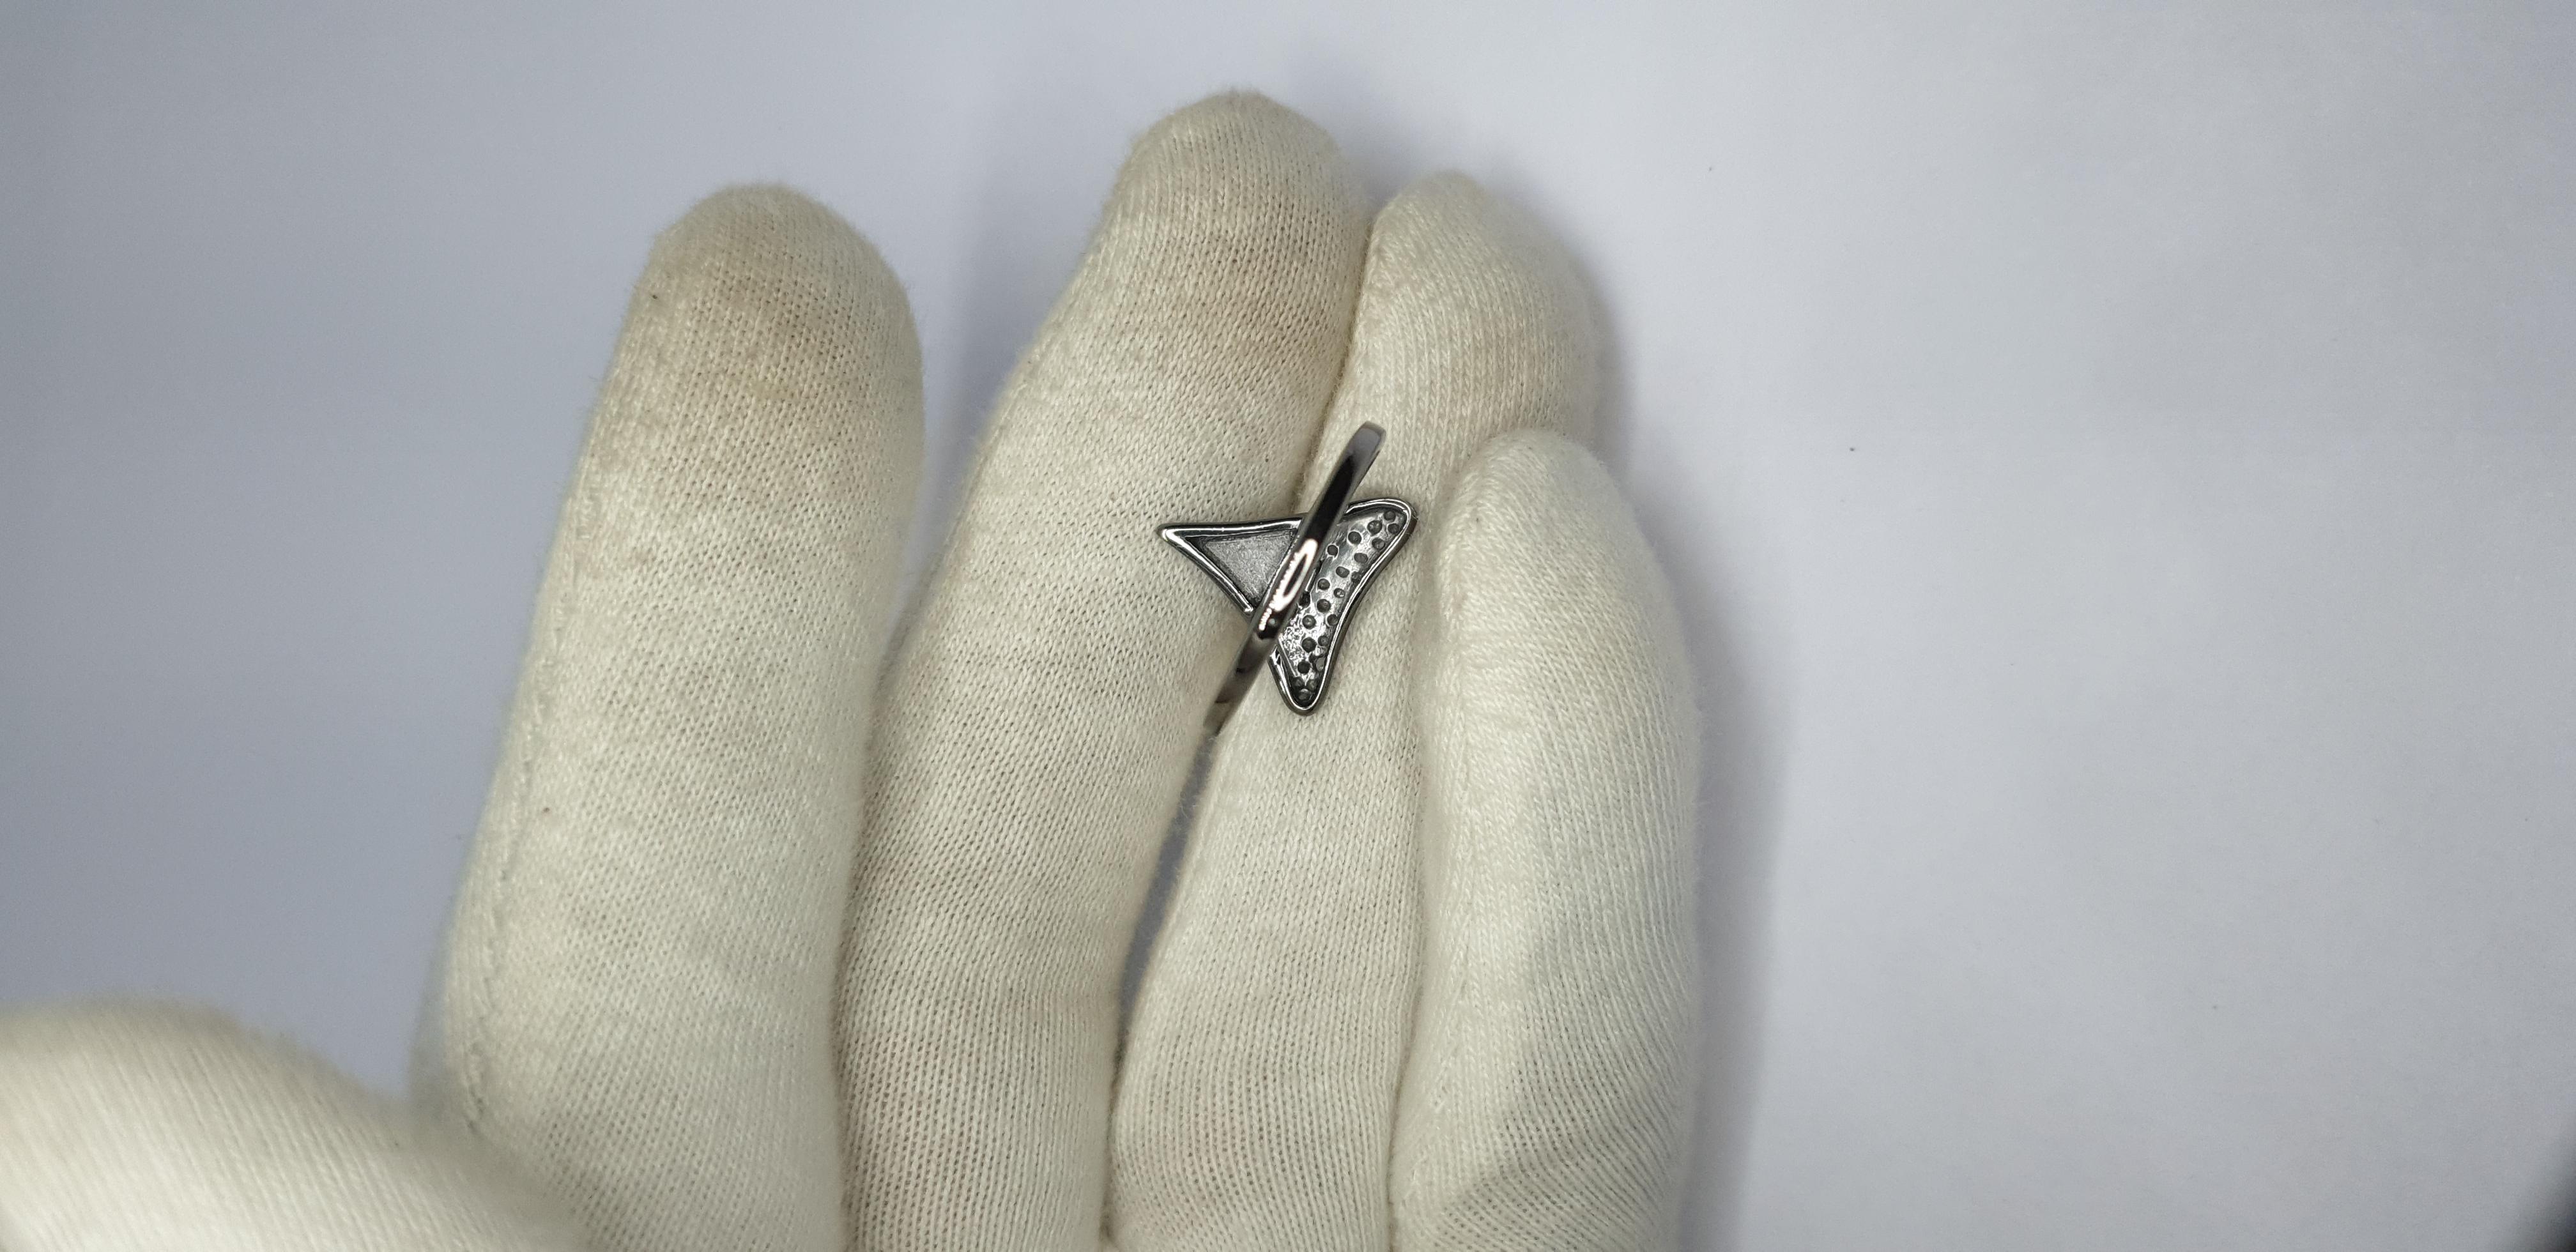 Uncut Shark Tooth Ring Pave Diamond Birthday Gift Ring 925 Silver Diamond Present Ring For Sale